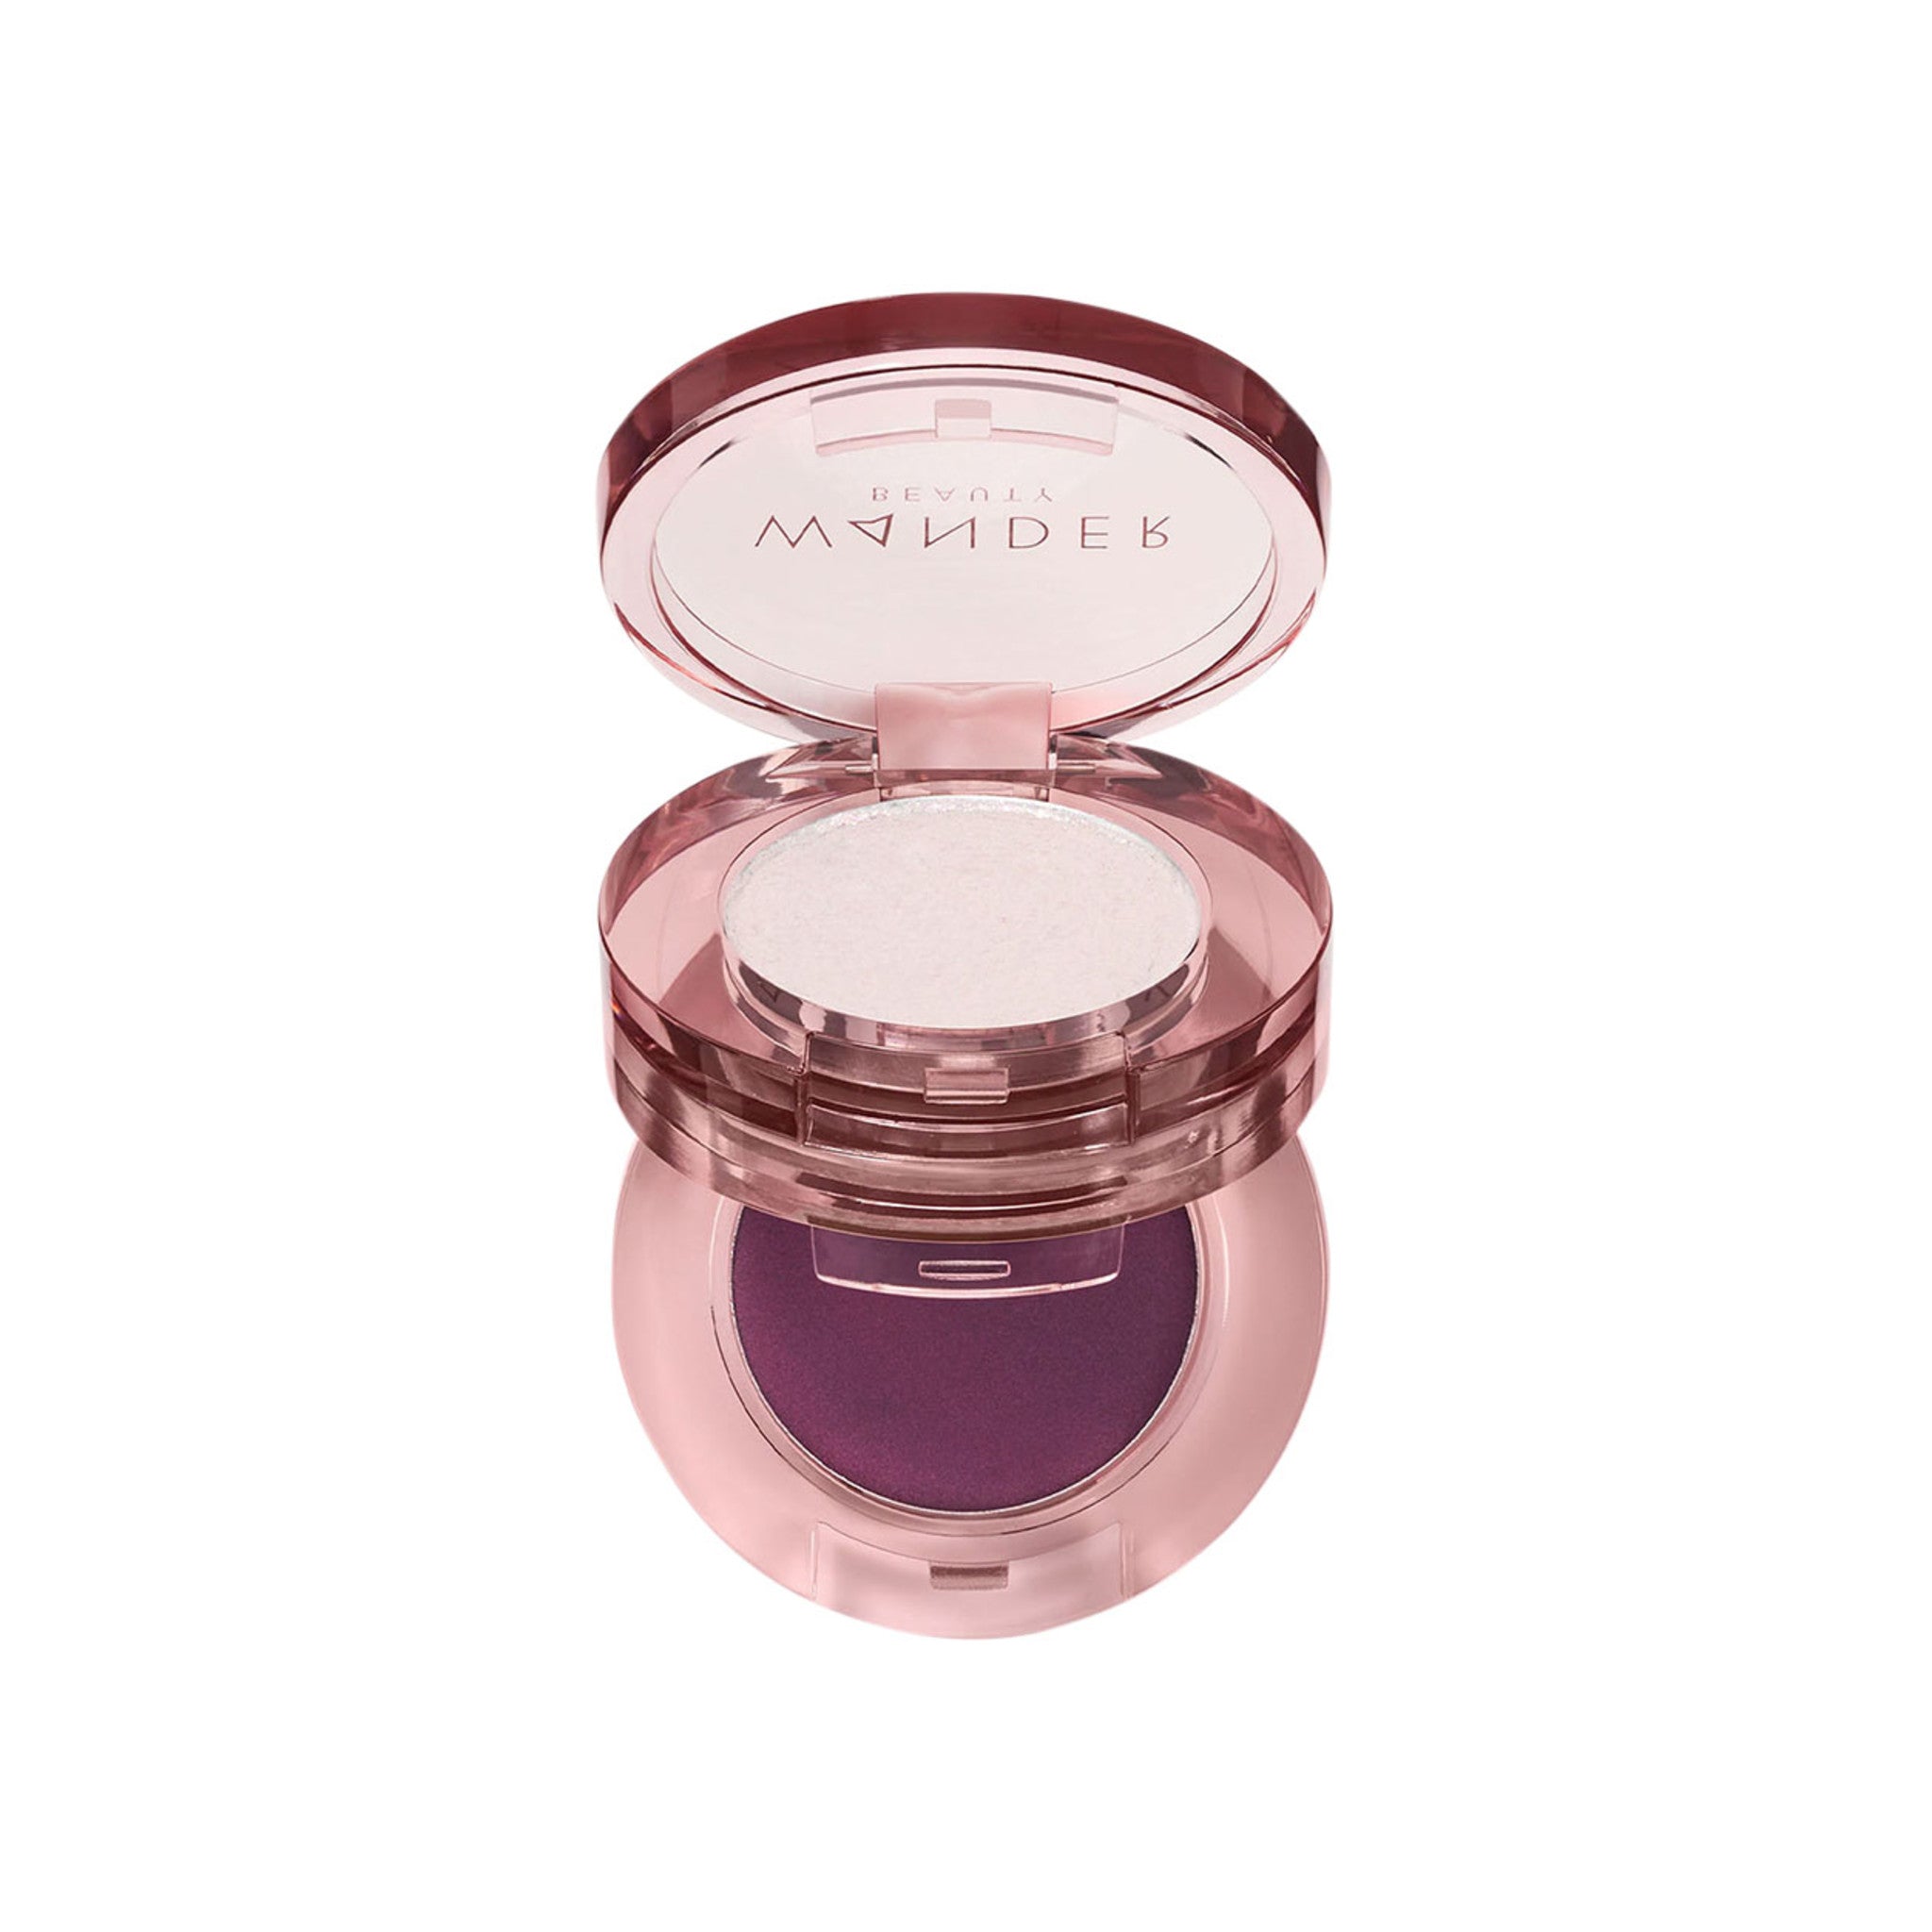 Wander Beauty Double Date Eyeshadow Duo Color/Shade variant: Wink/BAE main image. This product is in the color purple